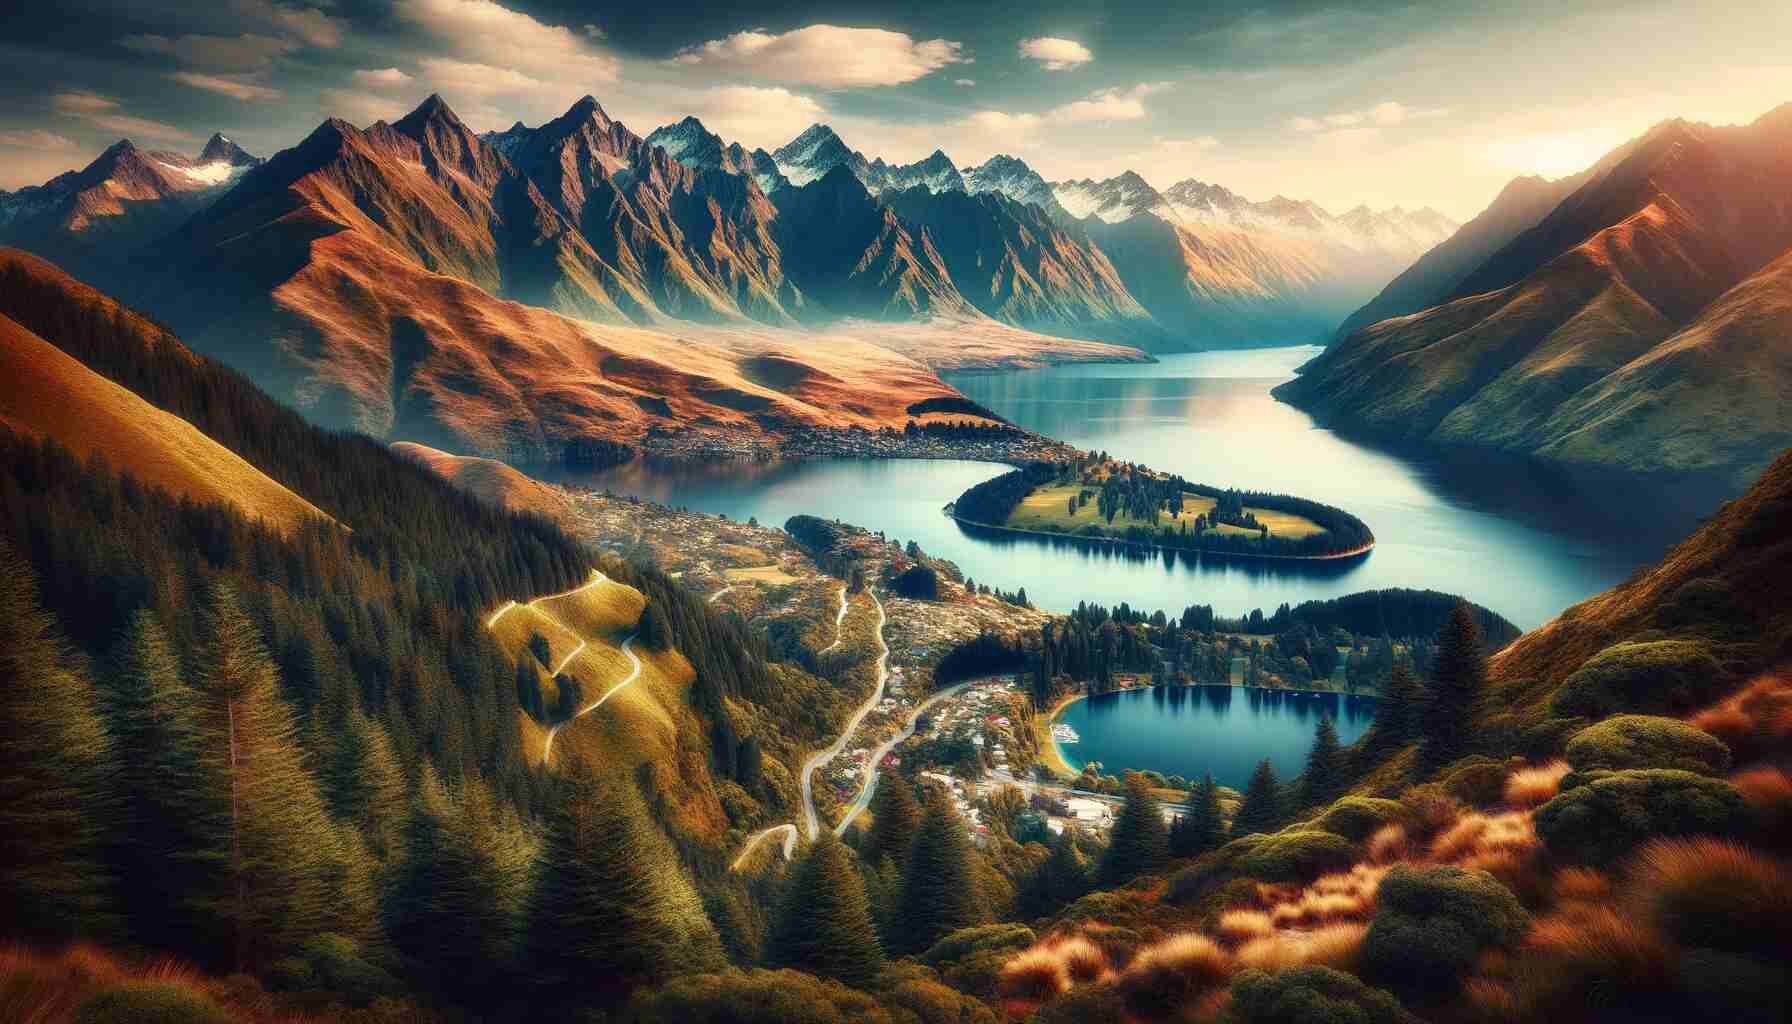 This image is highlighting the alpine scenery around Queenstown, New Zealand. It showcases Lake Wakatipu, the Remarkables mountain range, and elements of the Routeburn and Milford Tracks.